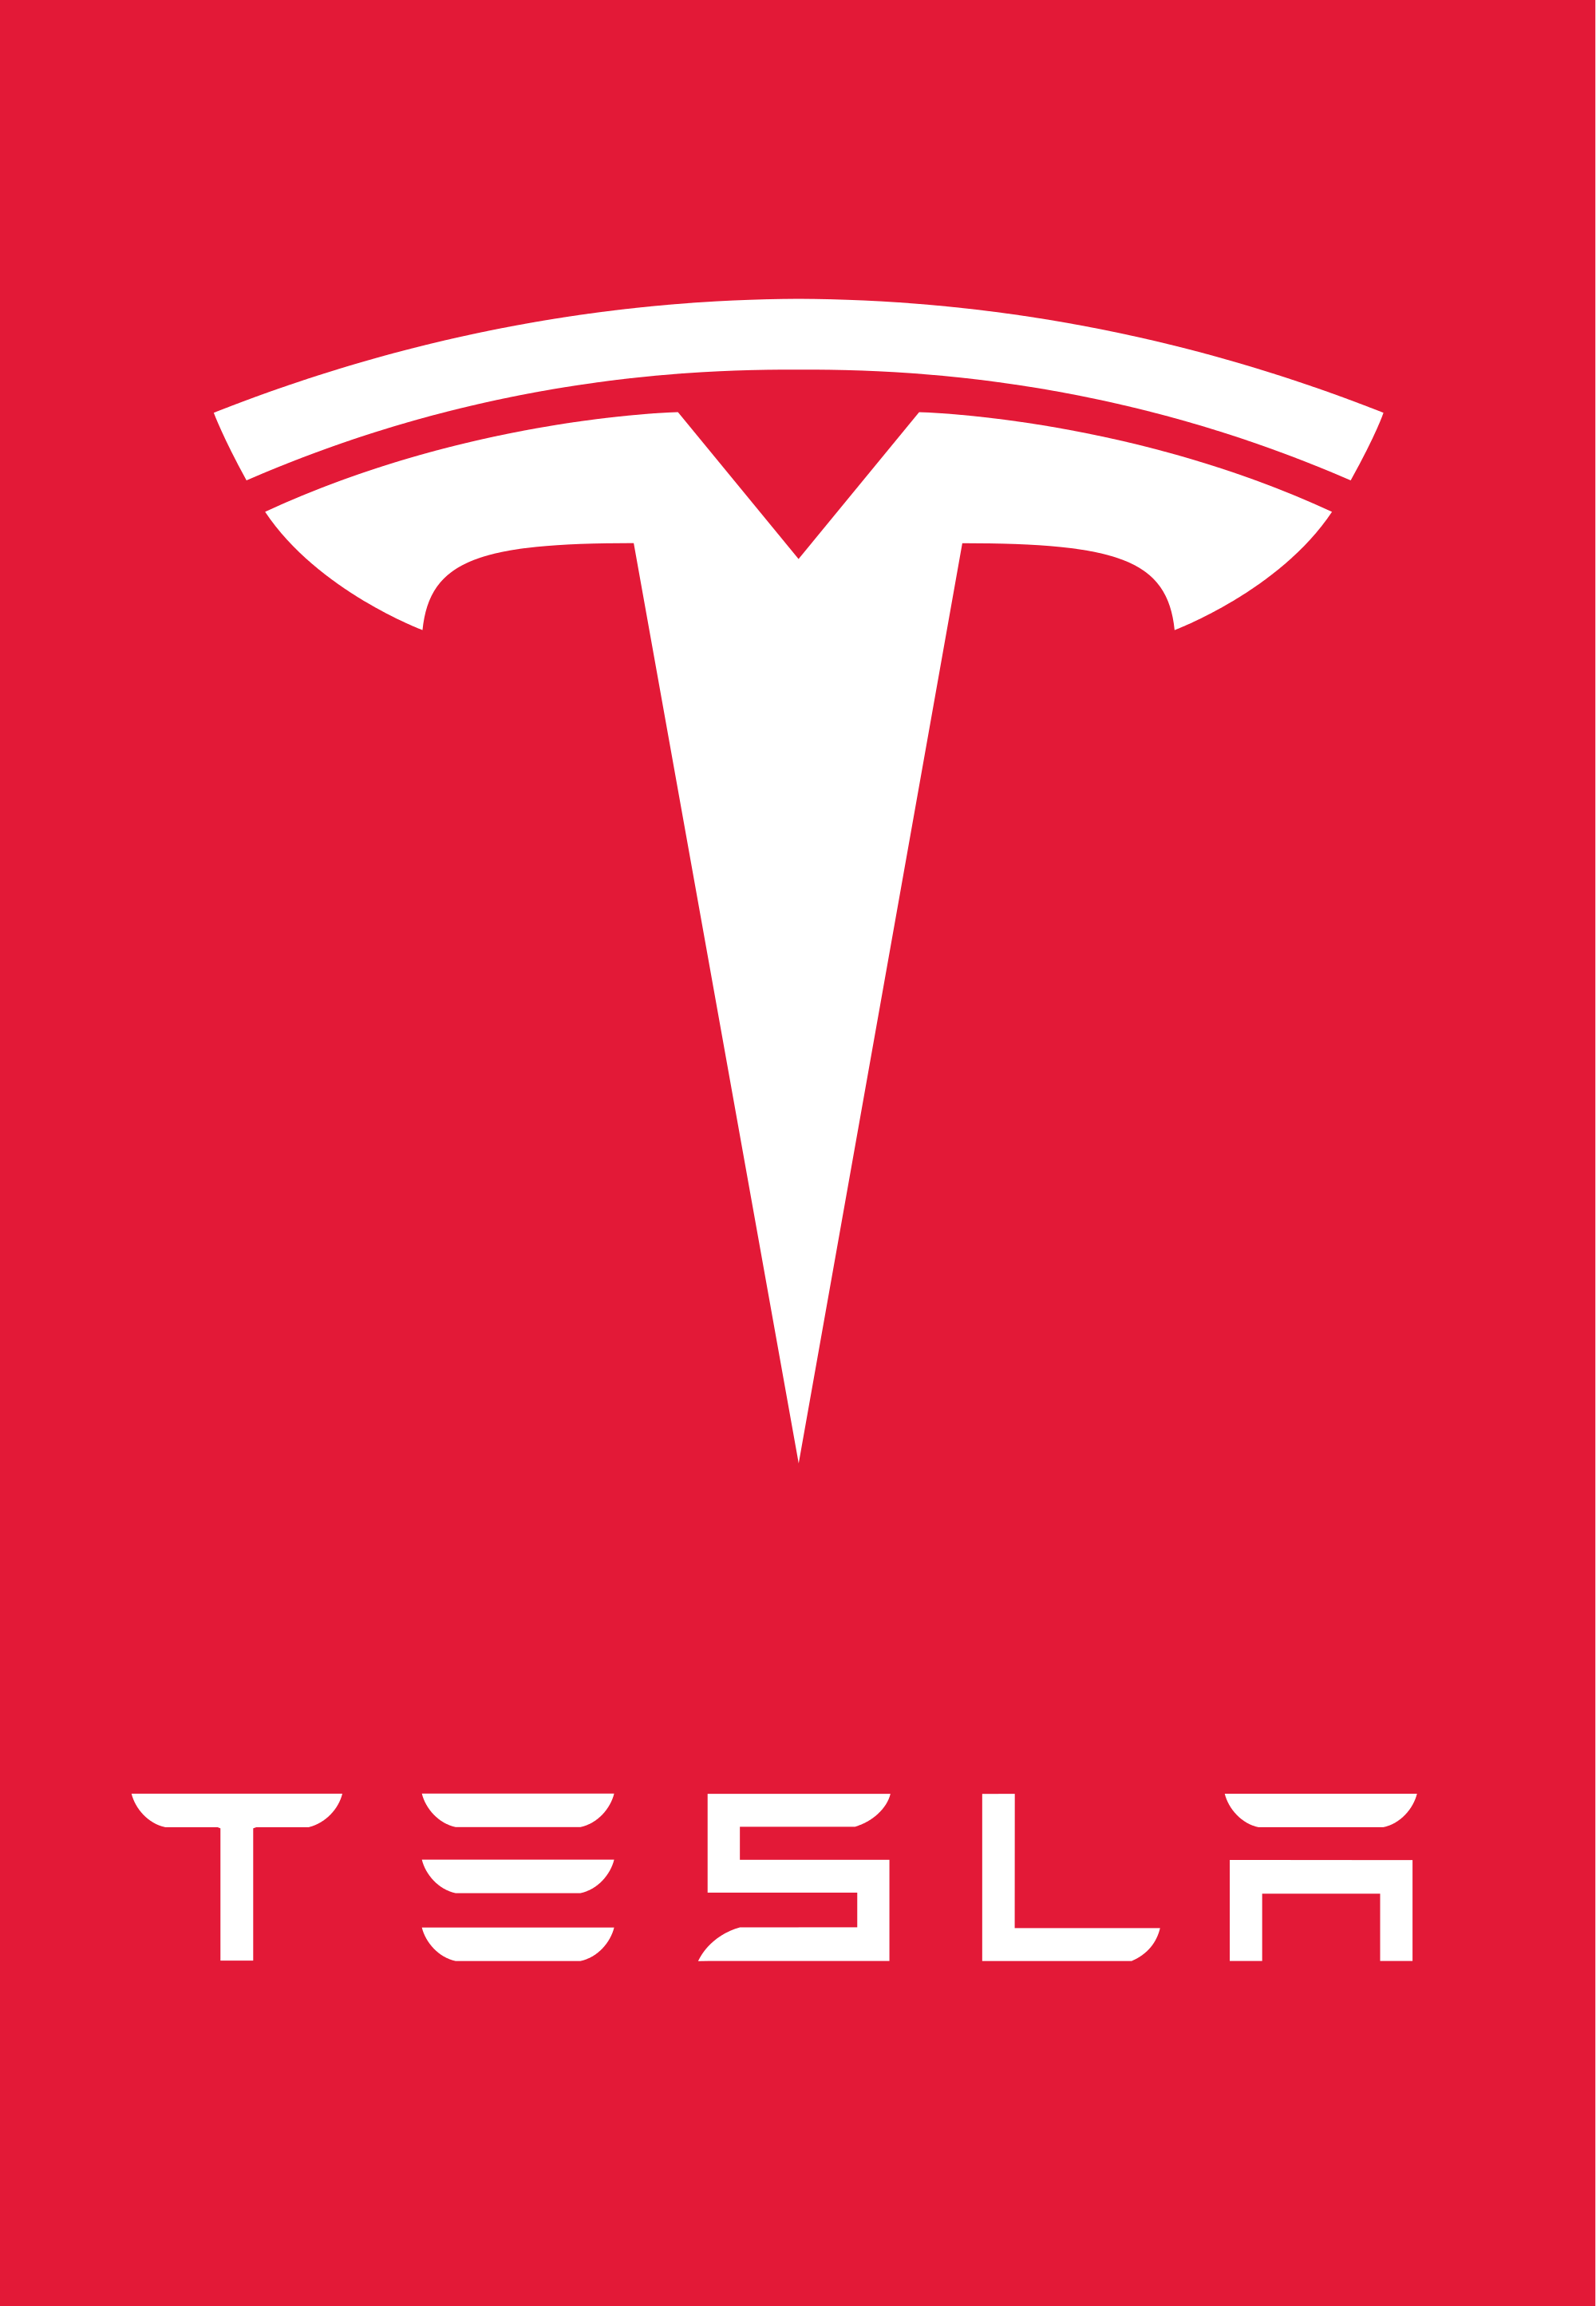 Tesla Carbon 2 wallpaper by bruceiras  Download on ZEDGE  0719